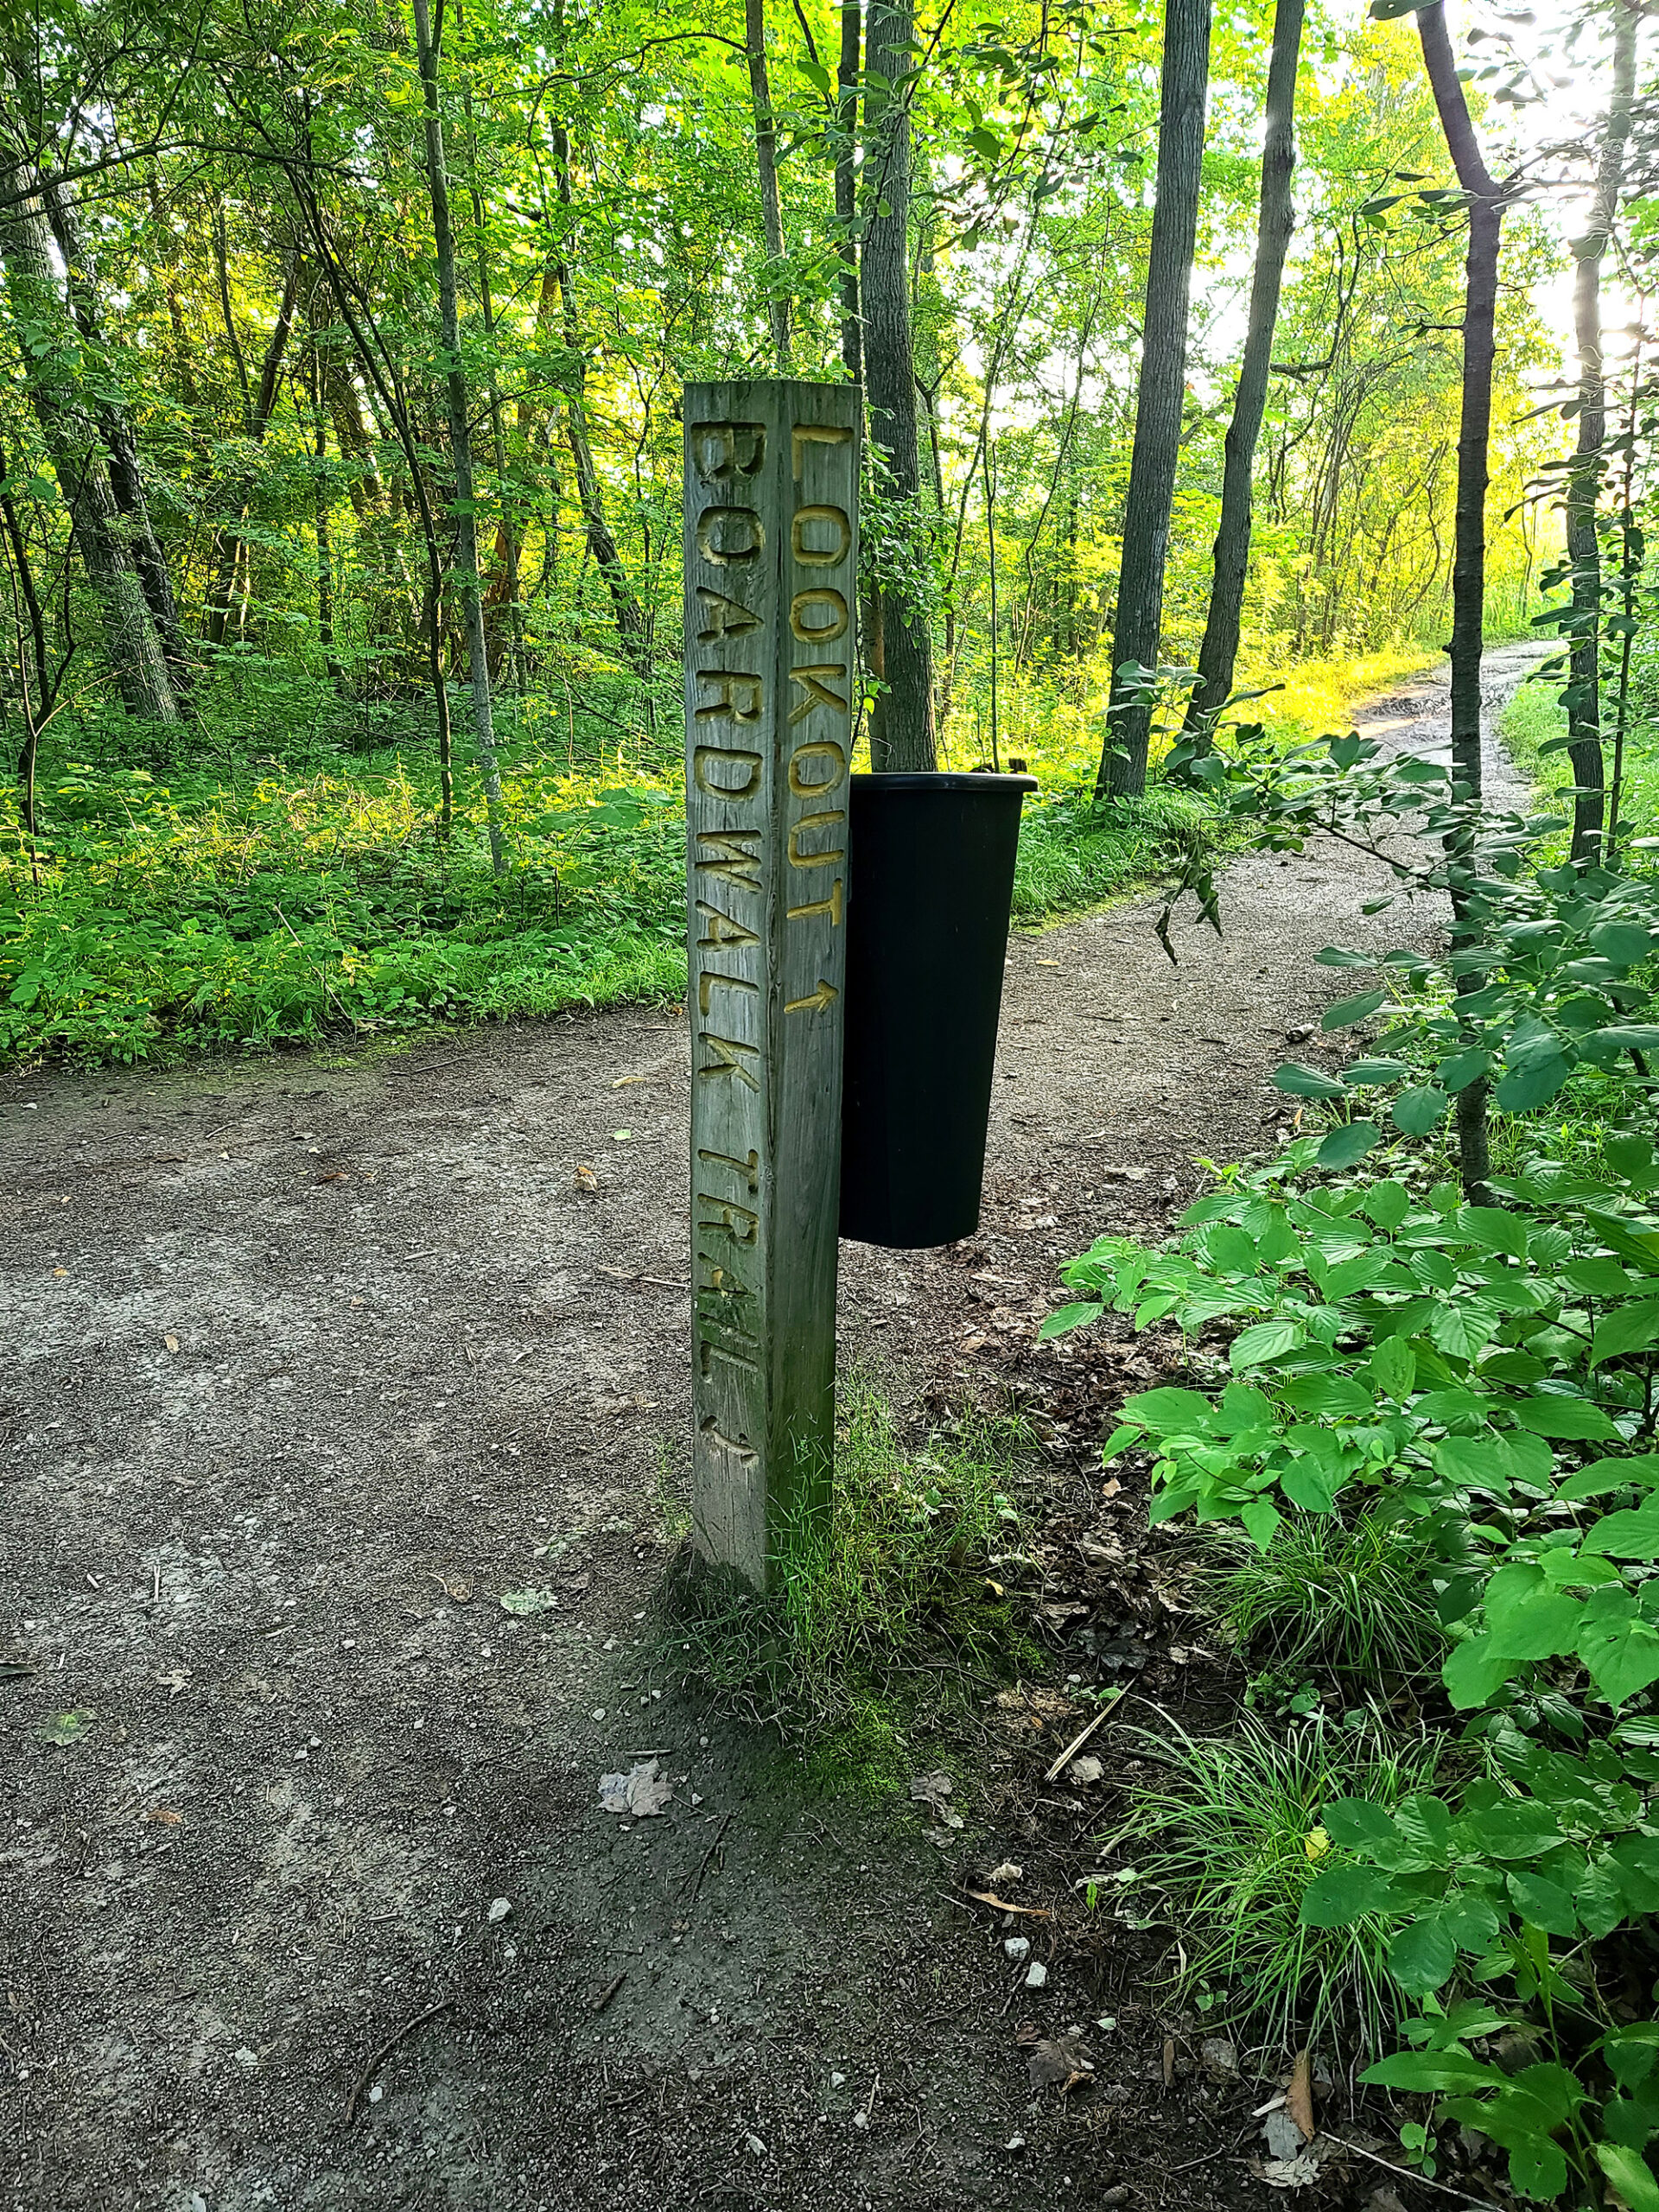 A wooden waypointer on a forest trail.